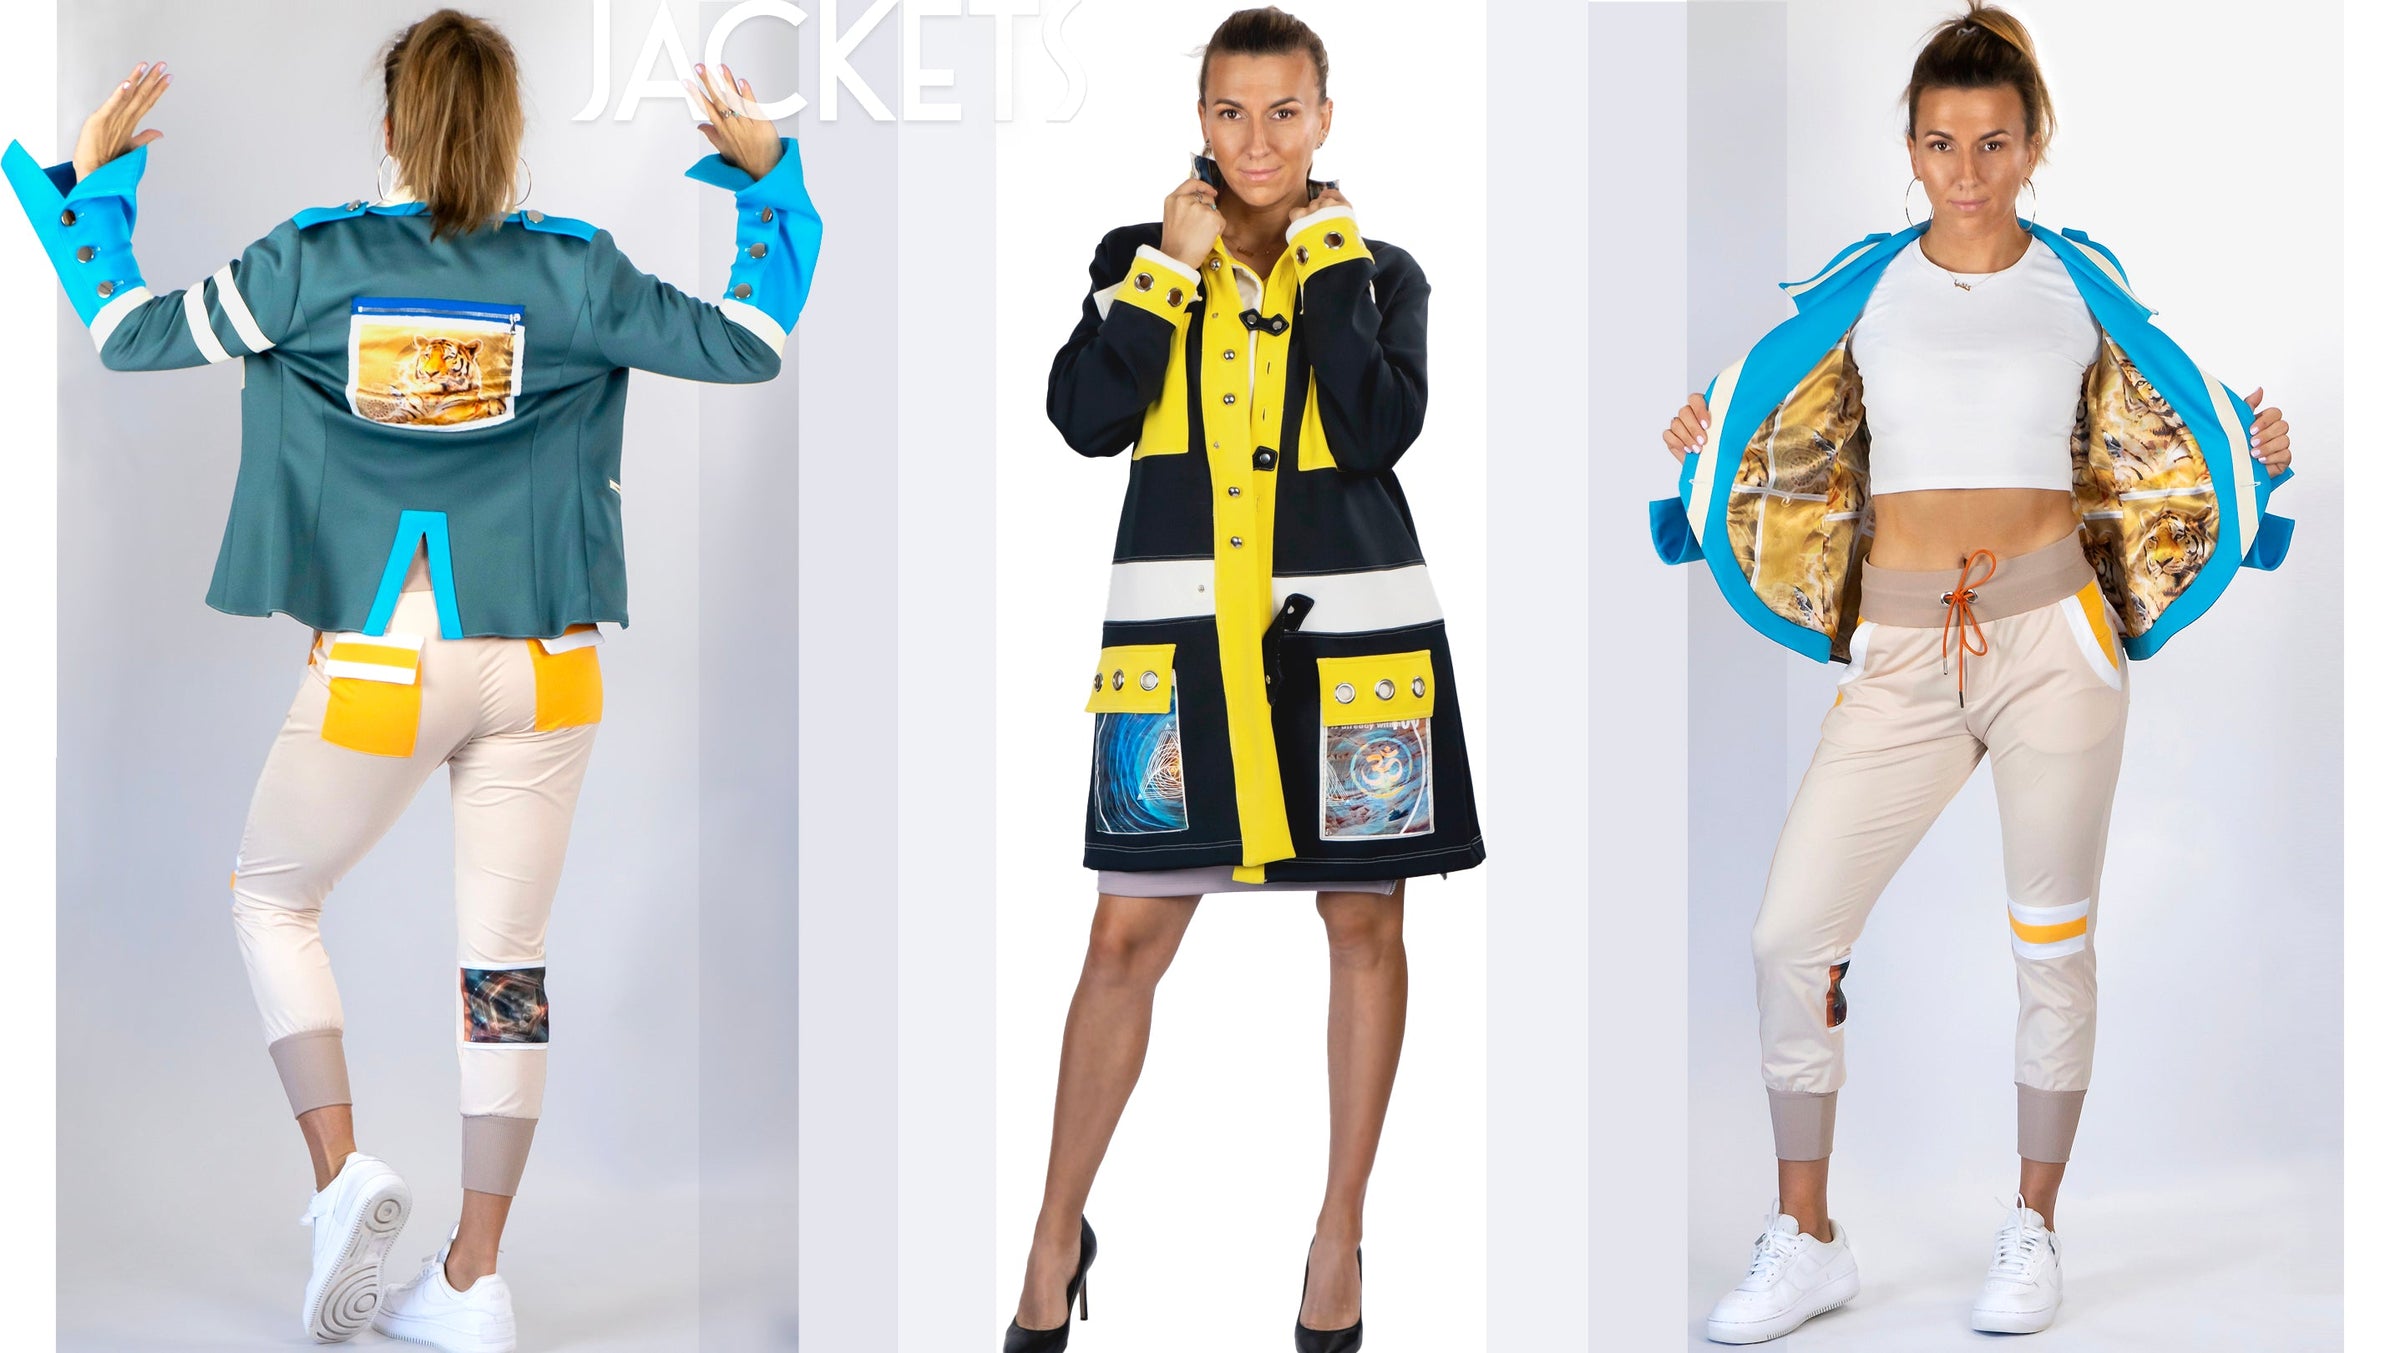 3 views of the trendy jackets, fashionable front and back of the blue/green jacket showing artwork lining and stylish black and yellow/white accent jacket in the middle